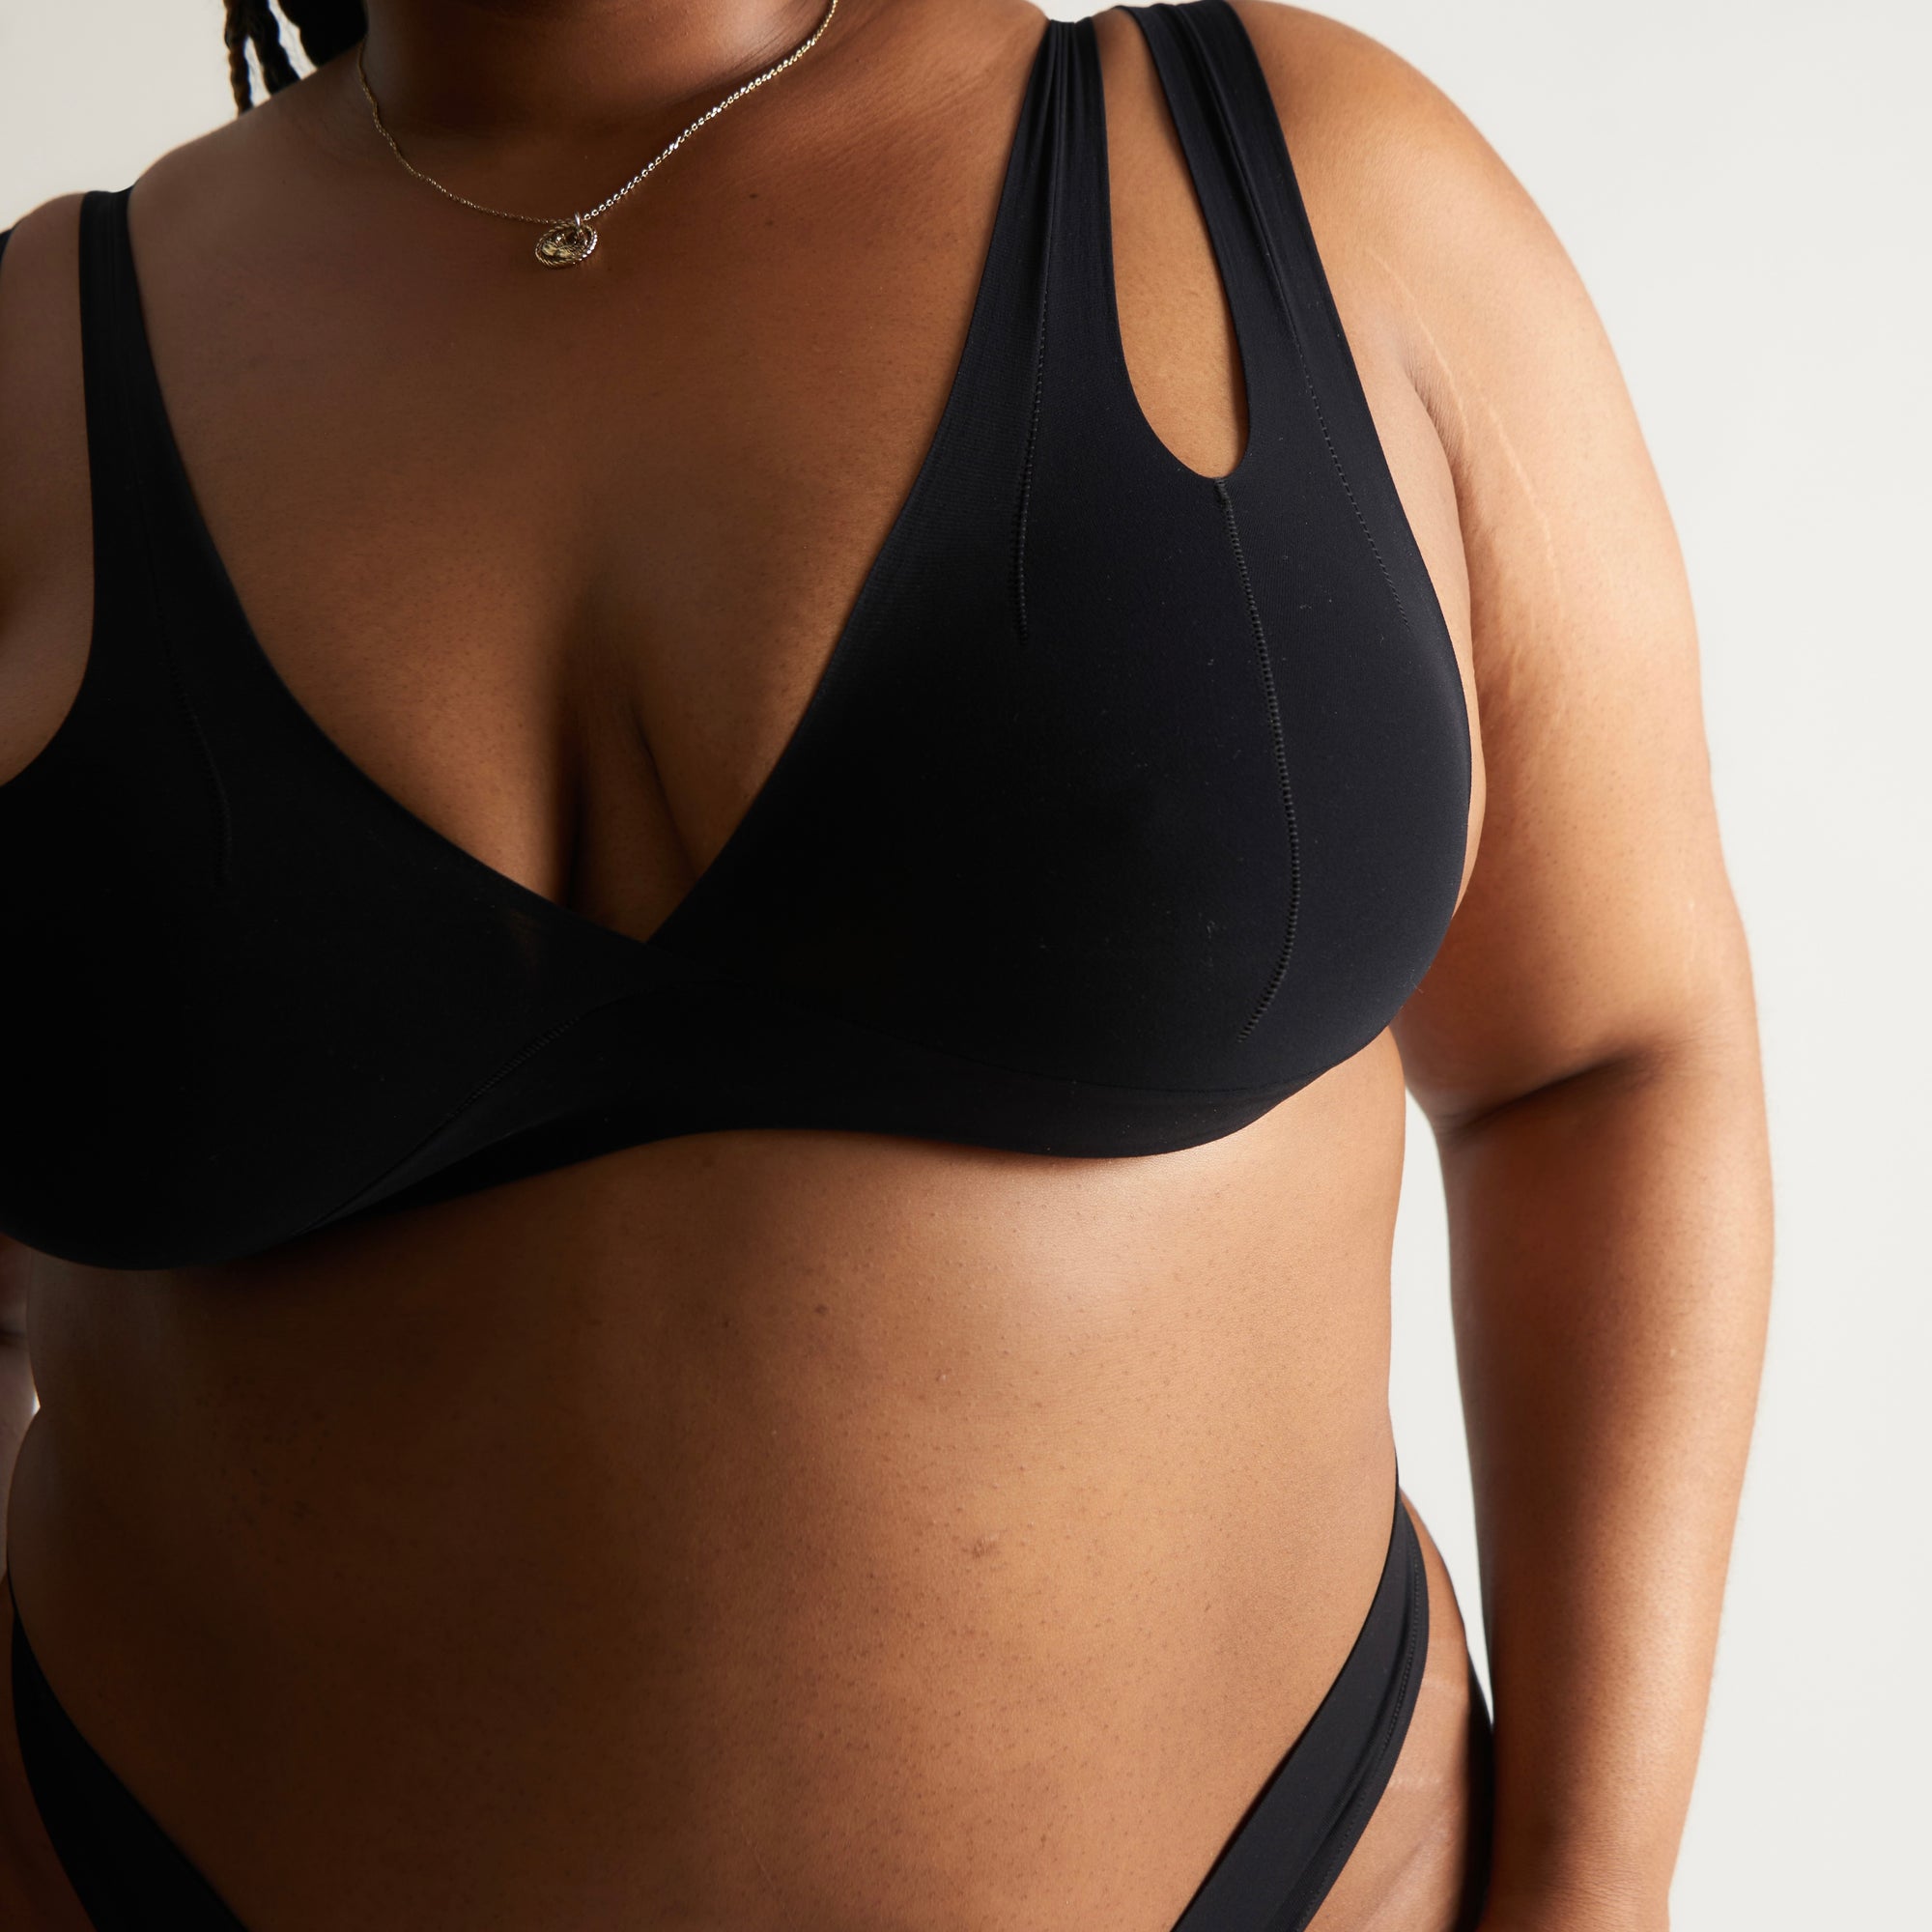 Hate bras? Us too. Nuudii is the option between bra and braless - givi